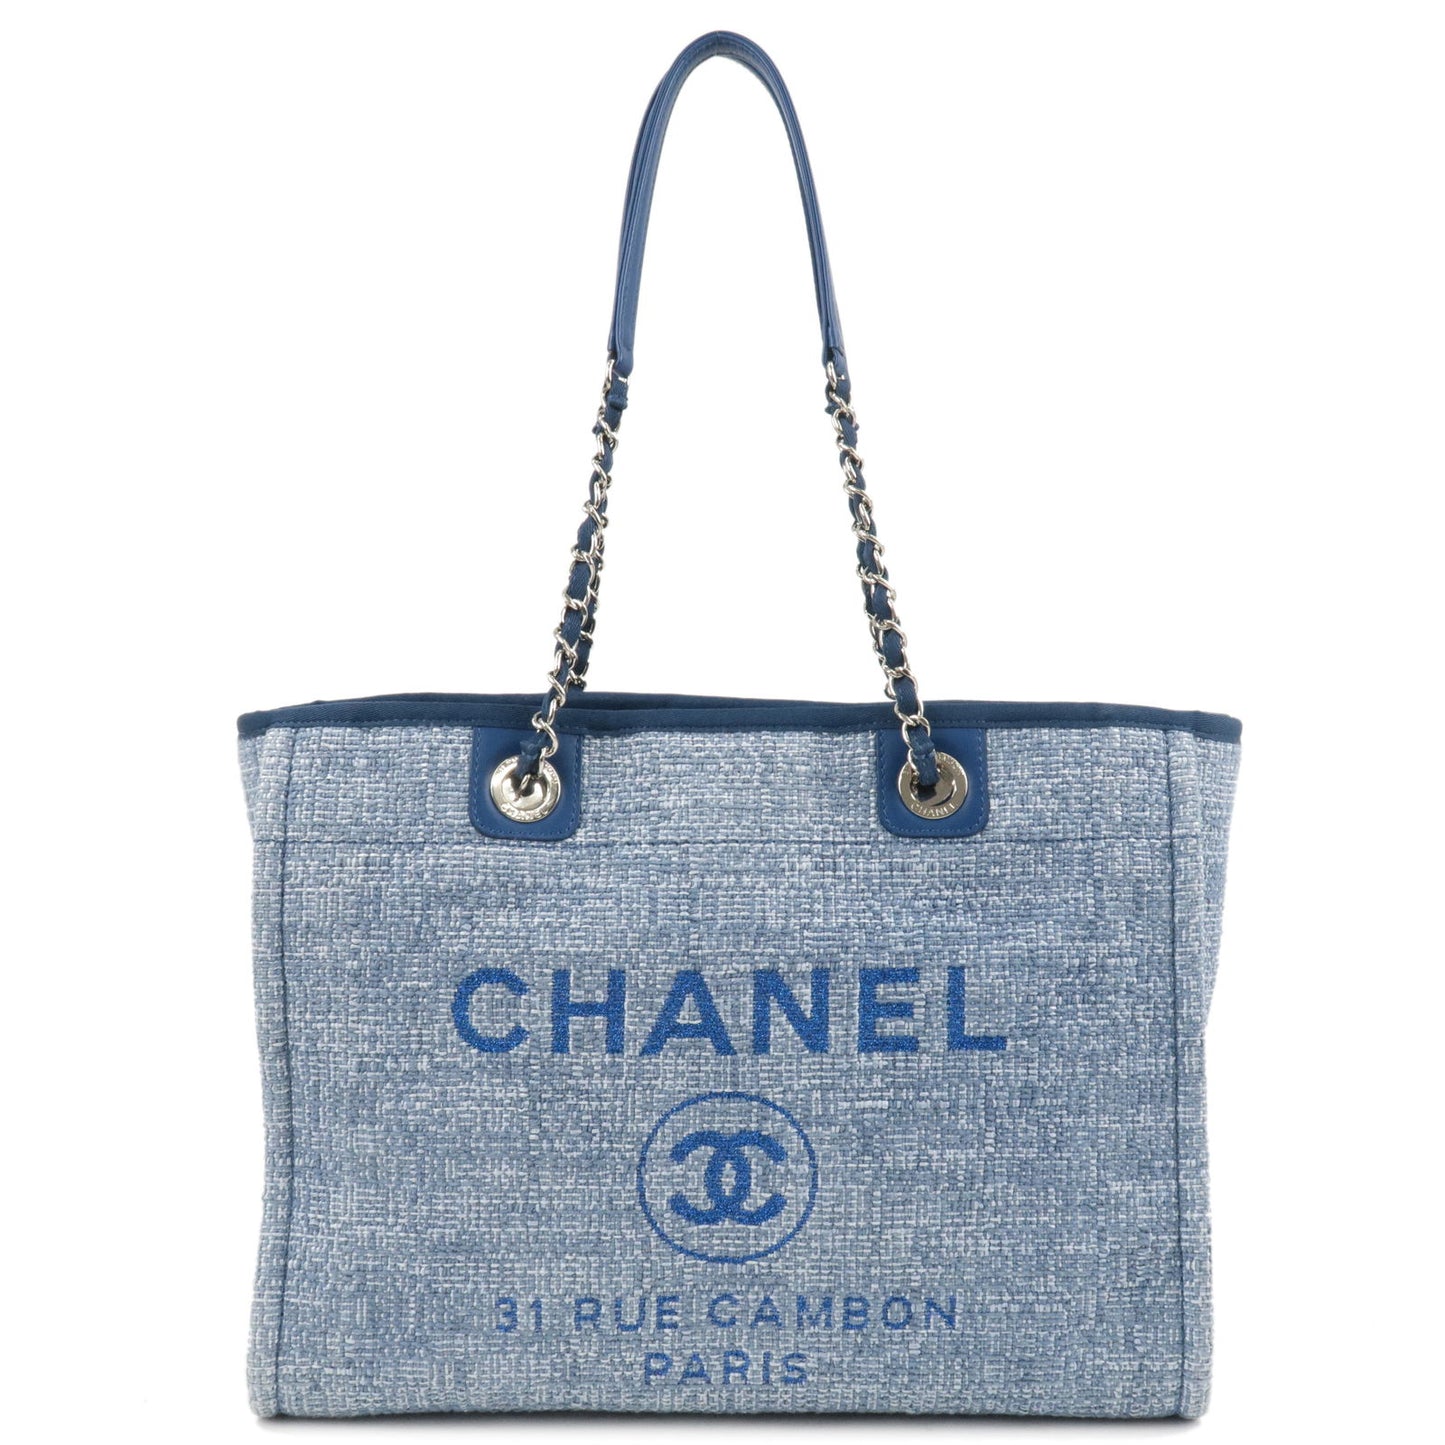 CHANEL Deauville Chain Tote Bag A67001 Glitter Dark Navy Canvas Leather 112